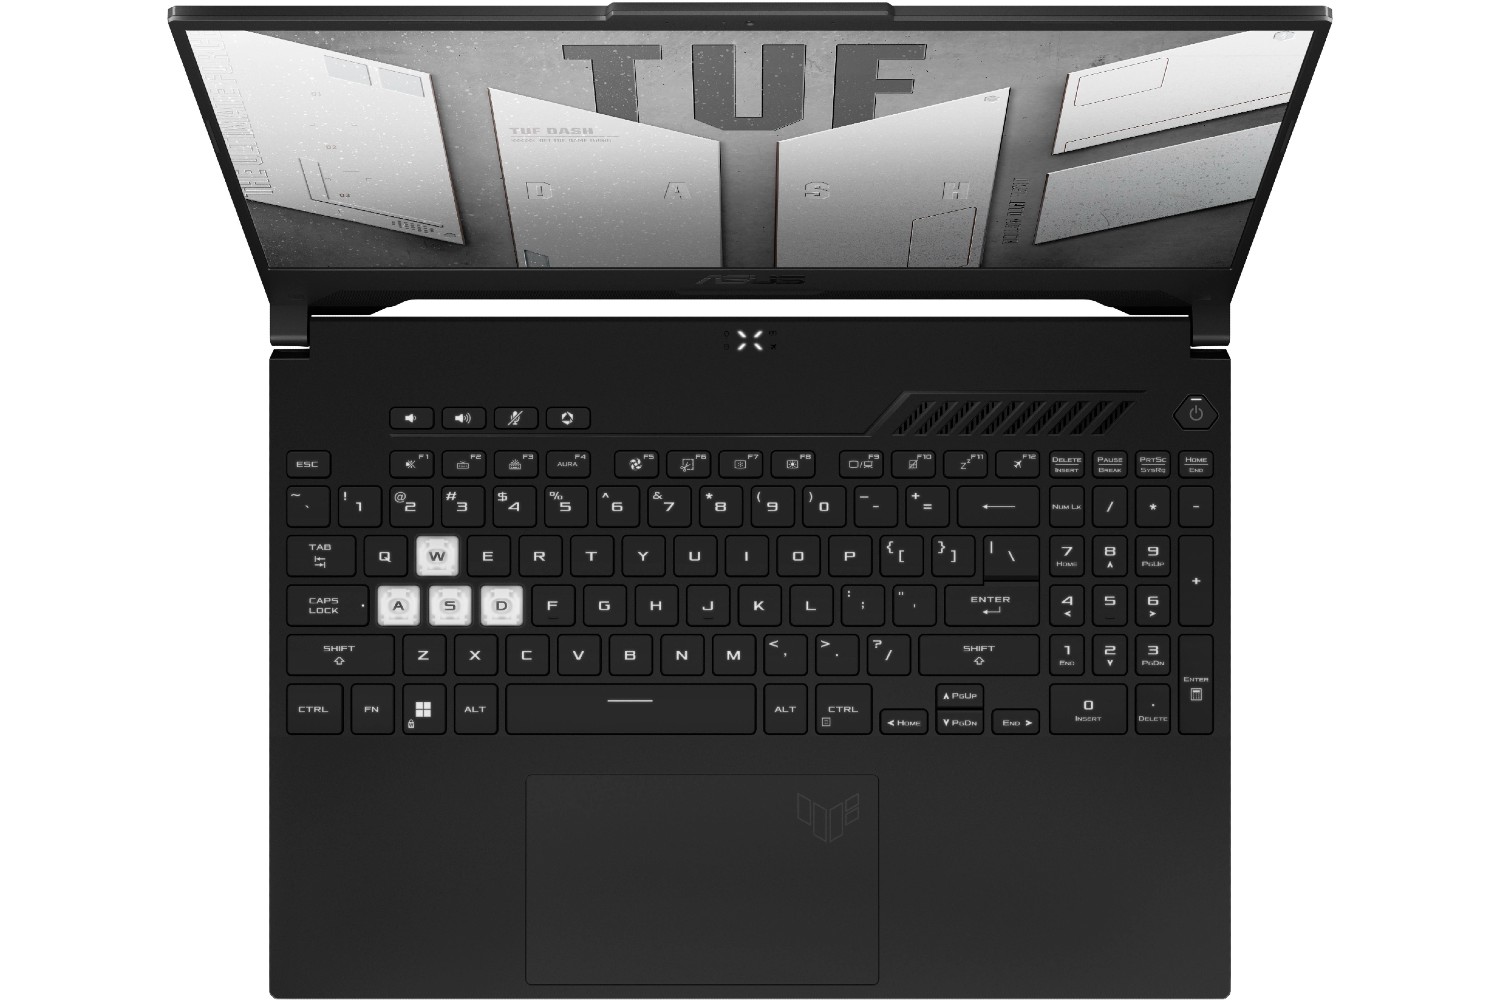 The keyboard shown on the Asus TUF Dash.